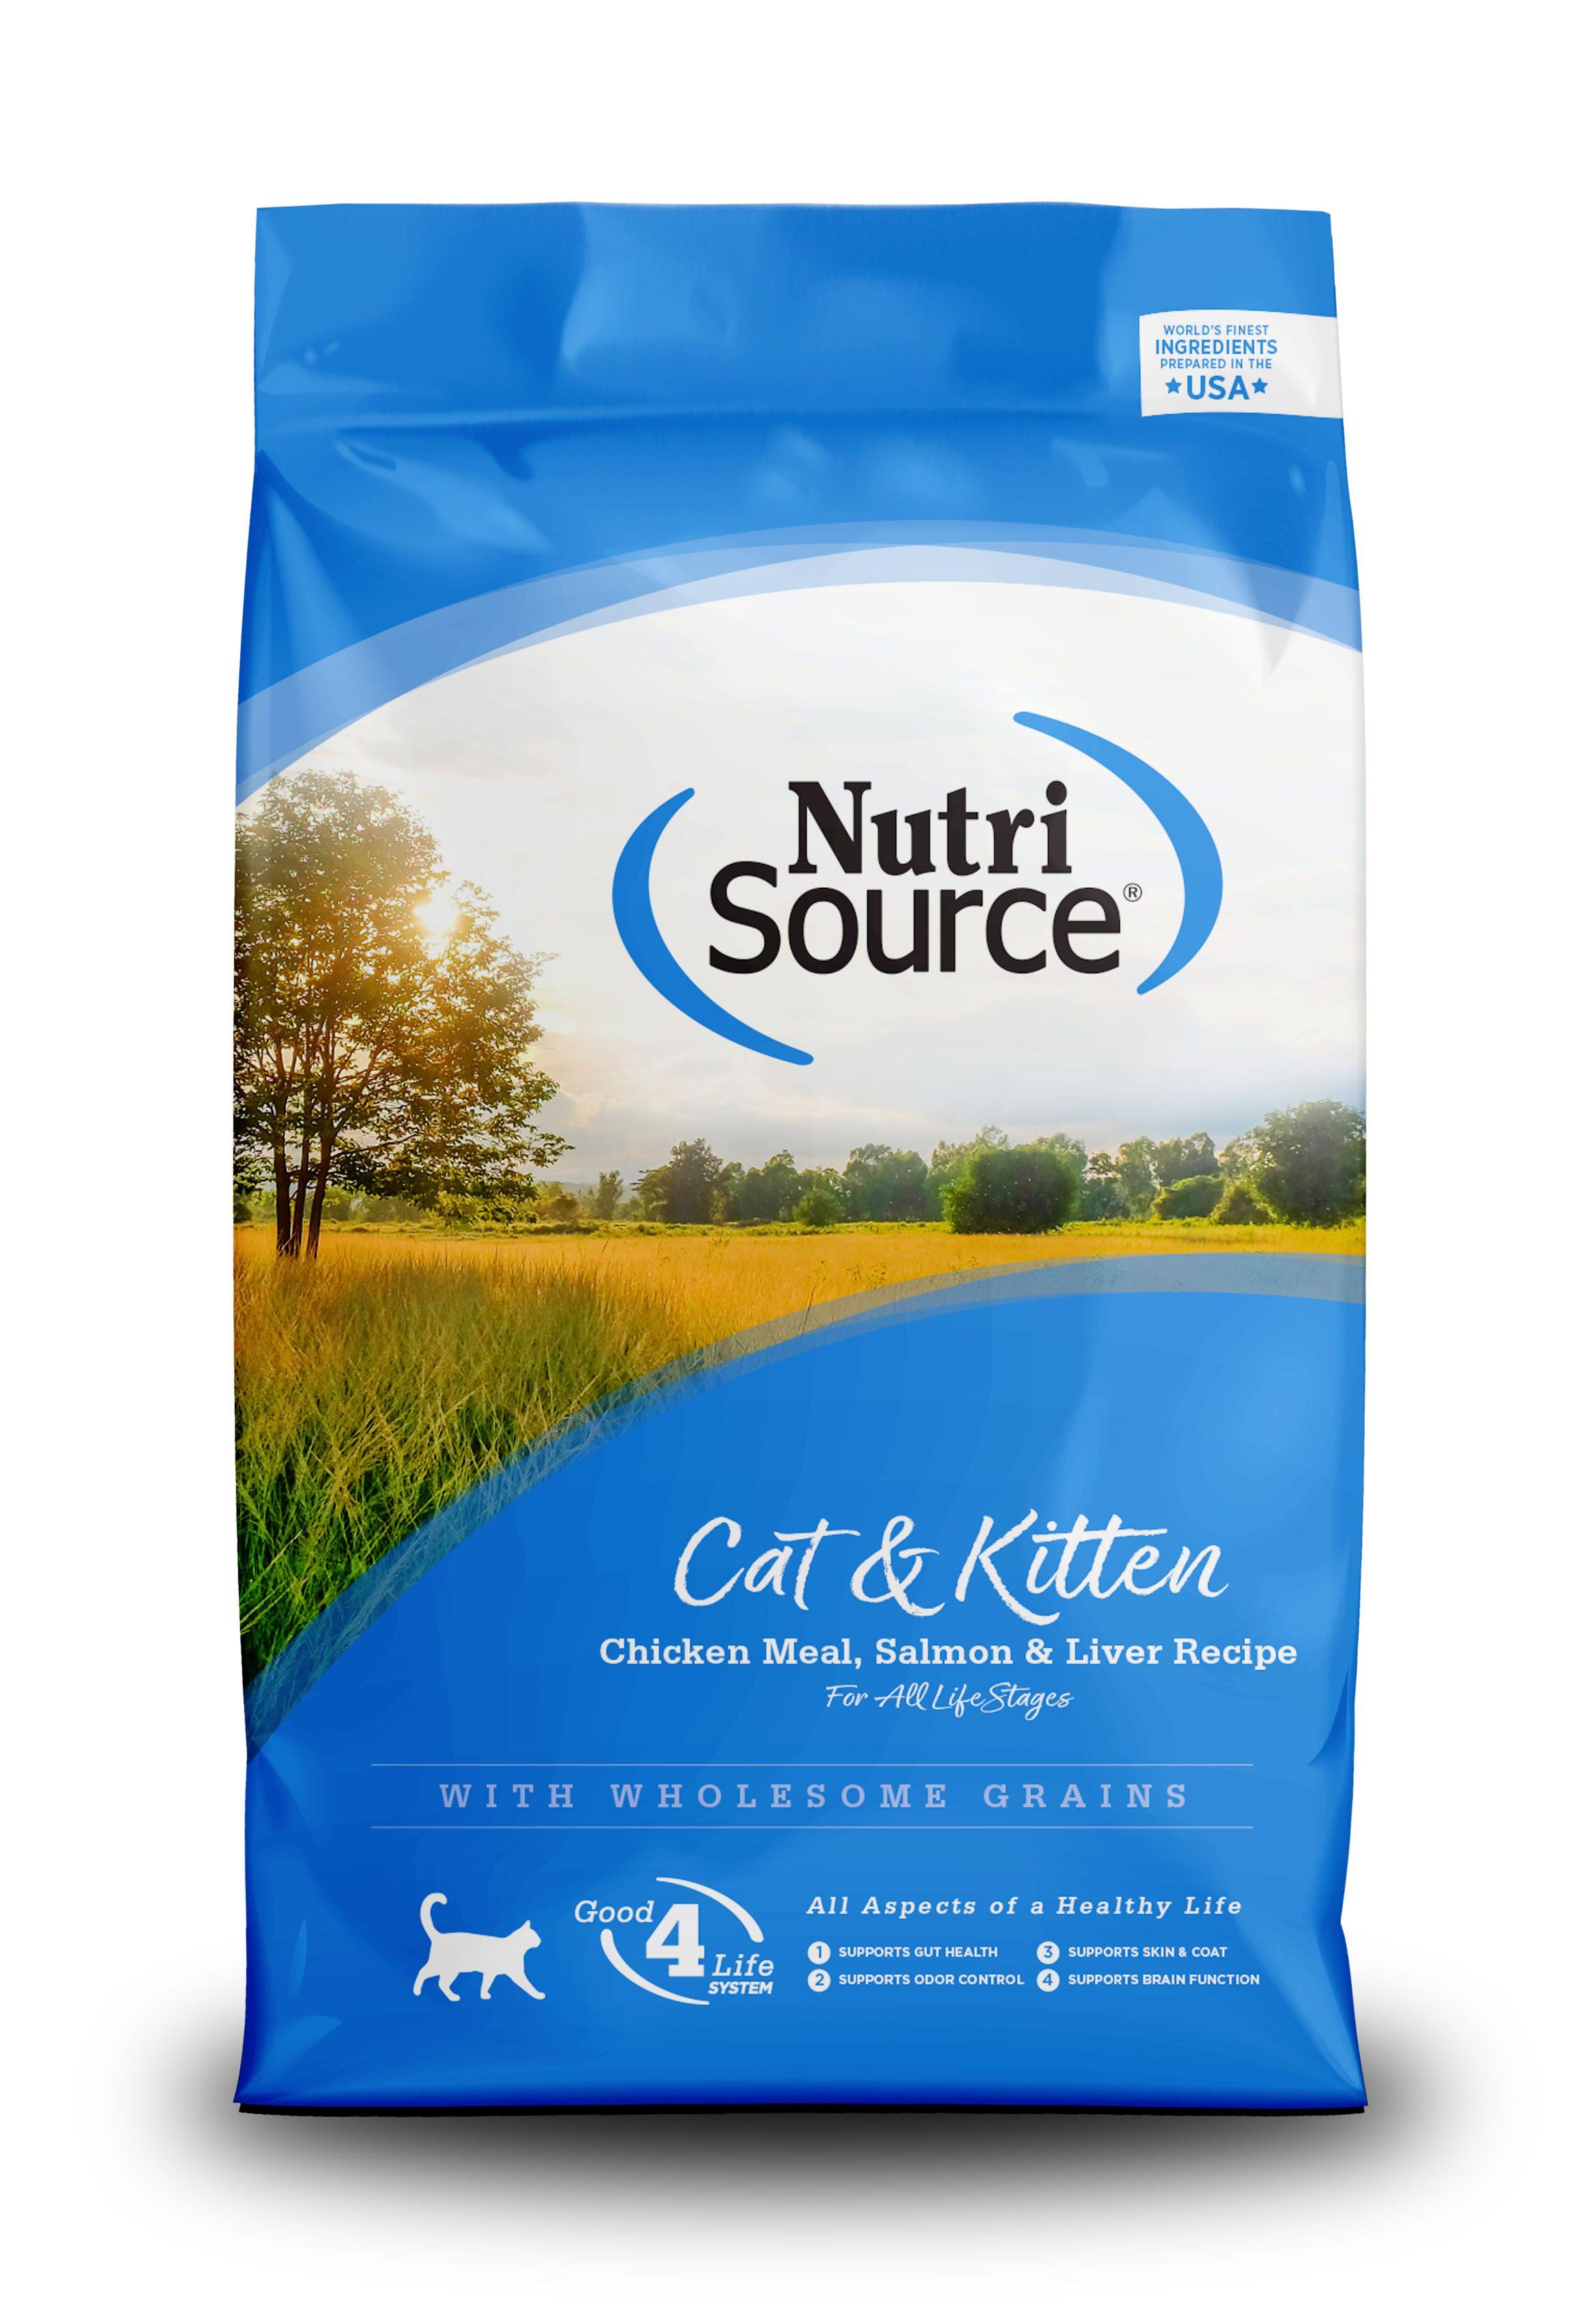 Nutri Source Cat & Kitten Dry Cat Food - Chicken & Rice, Liver, 16 lbs